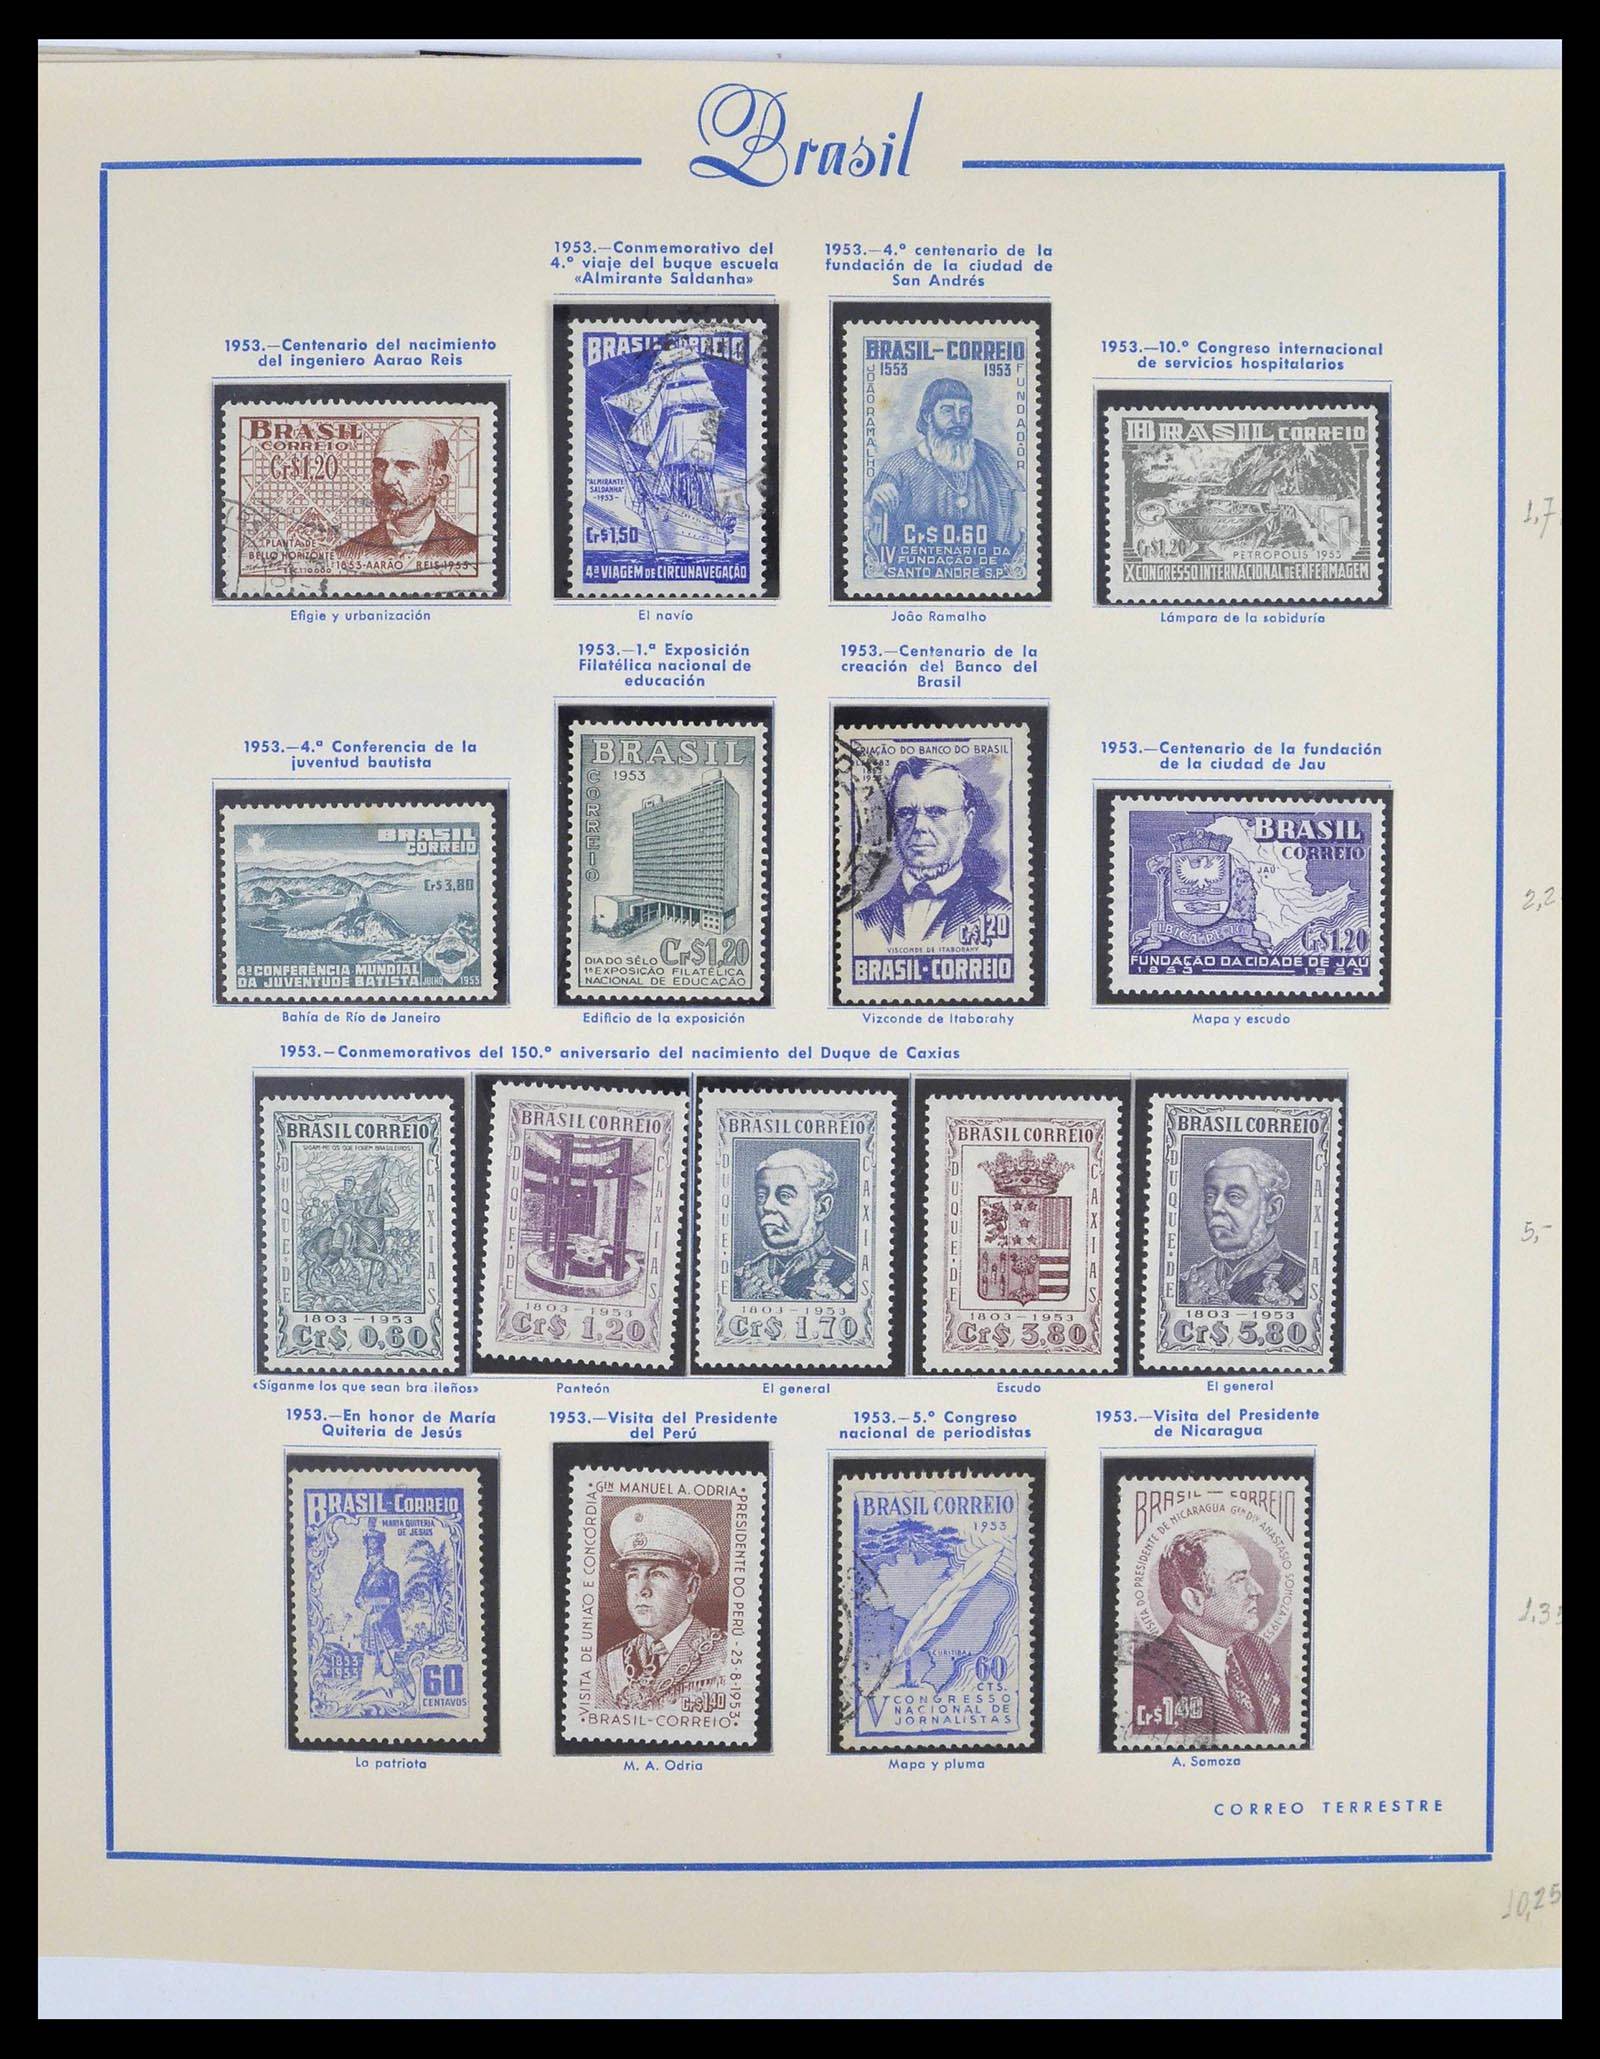 39245 0033 - Stamp collection 39245 Brazil 1843-1968.